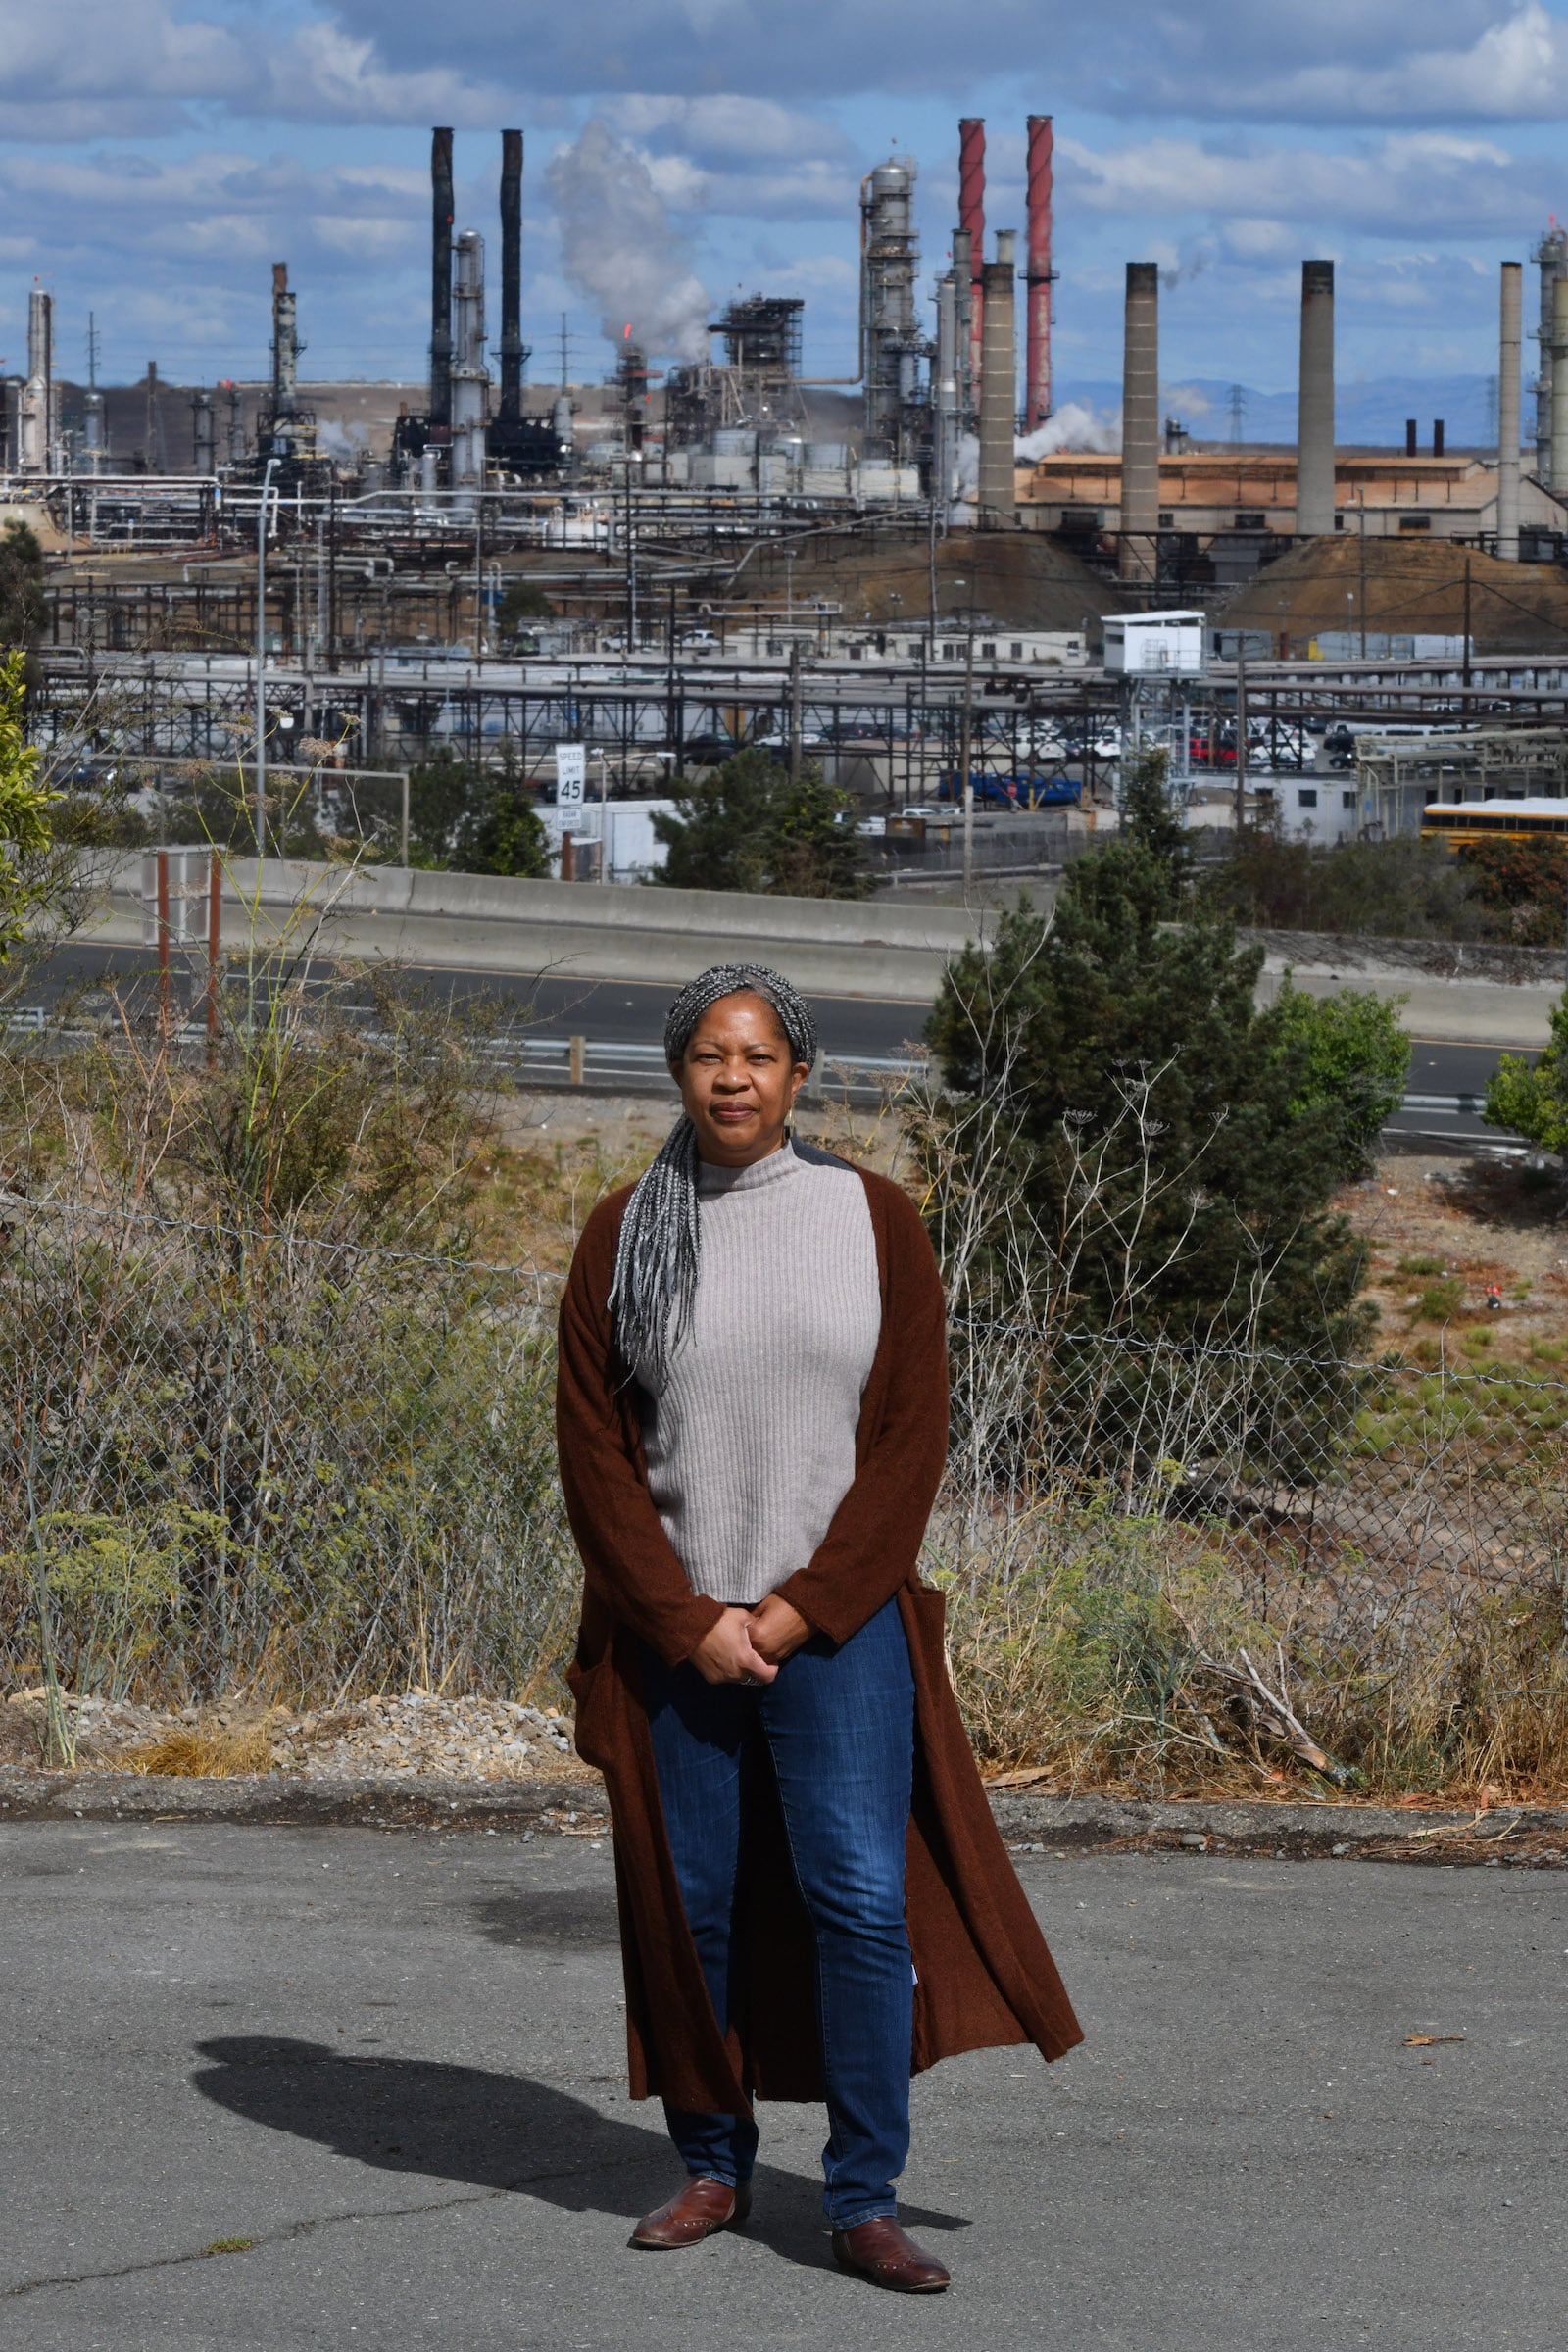 a woman in a gray shirt and red long coat stands in front of a refinery